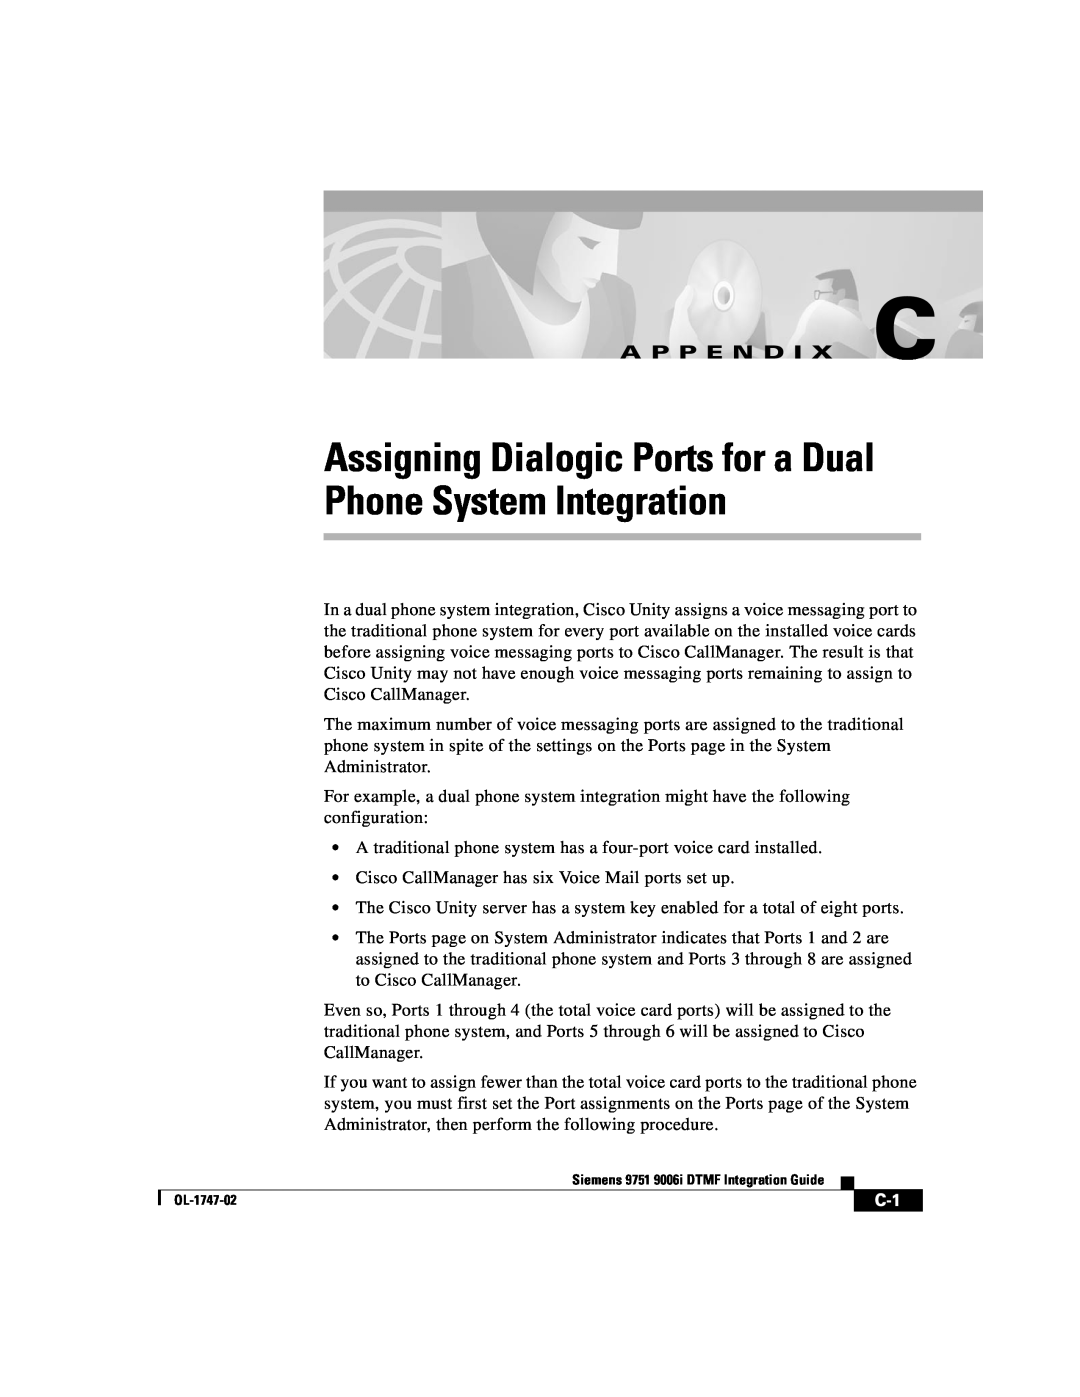 Able Planet OL-1747-02 manual Phone System Integration, Assigning Dialogic Ports for a Dual, A P P E N D I X C 